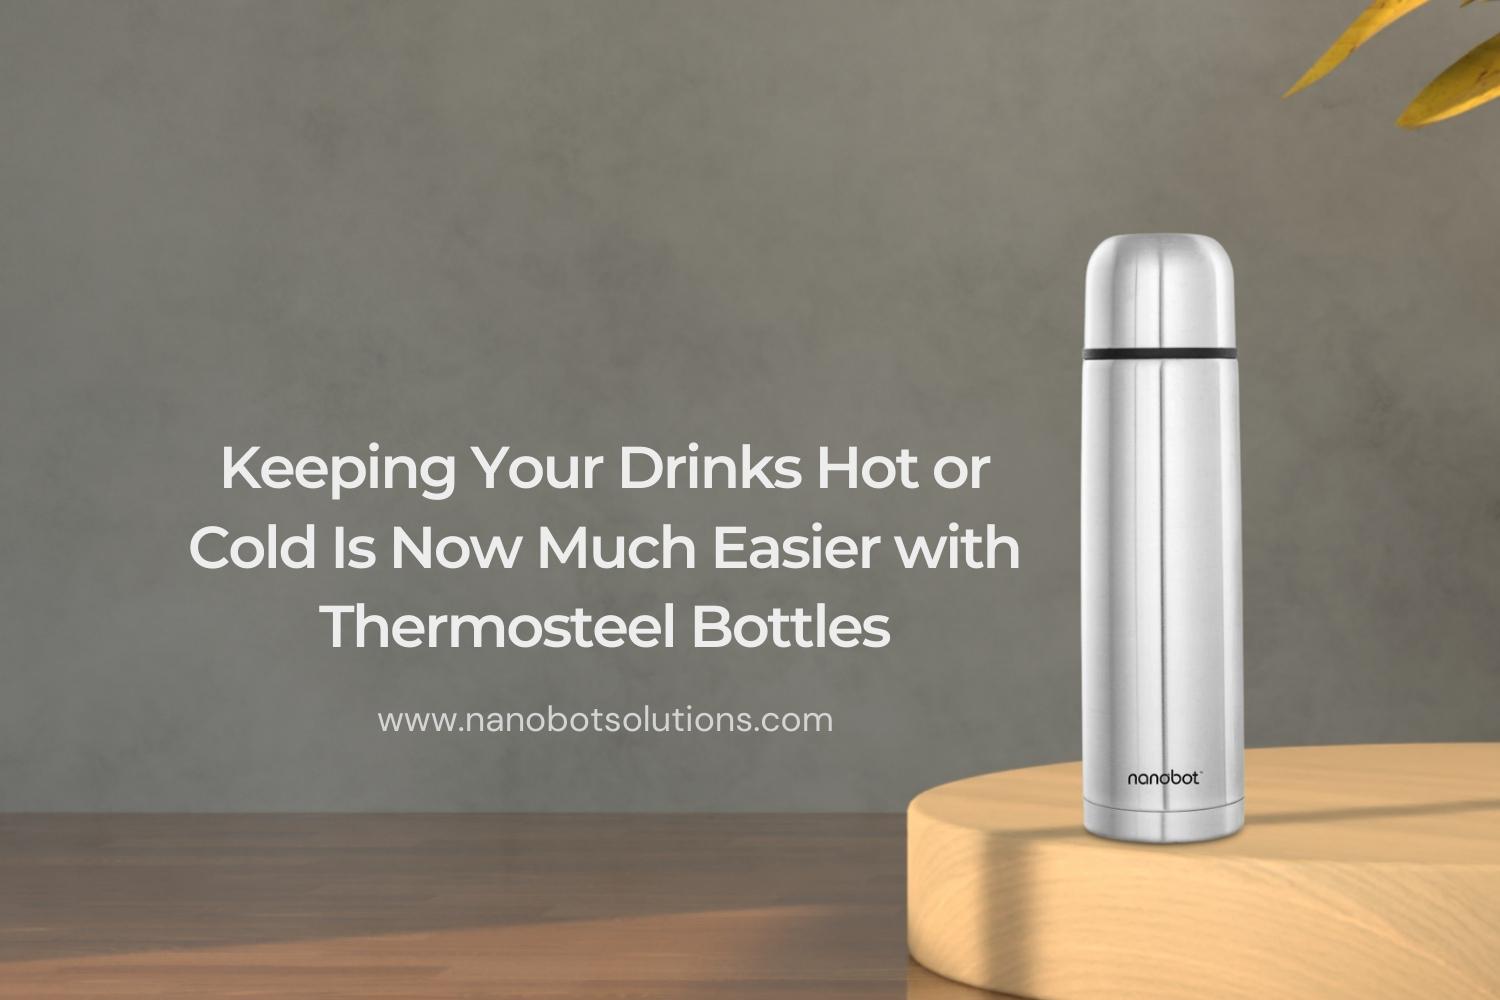 Keeping Your Drinks Hot or Cold Is Now Much Easier with Thermosteel Bottles | Nanobot